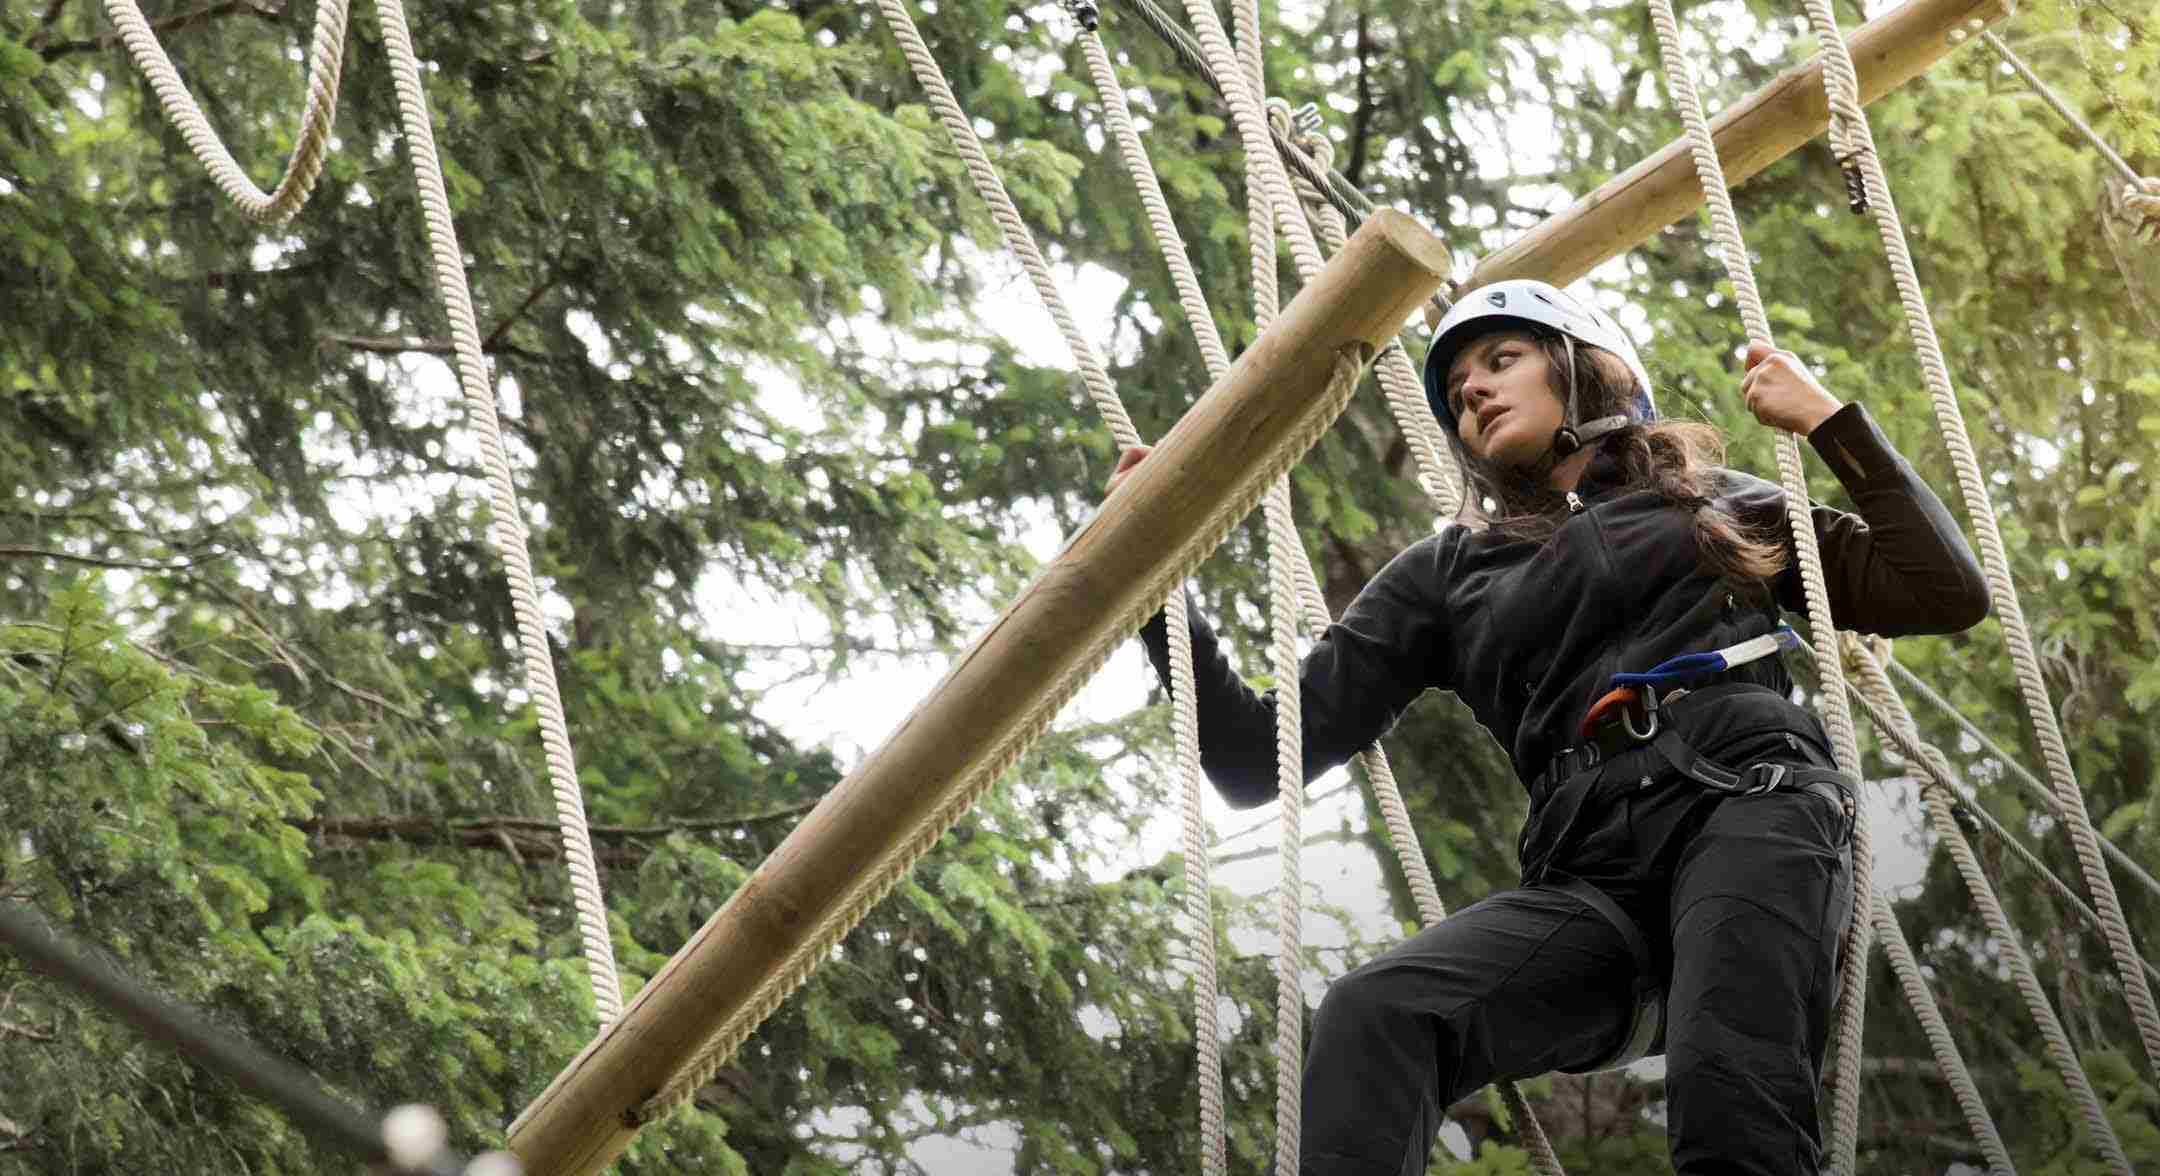 A woman completing an obstacle course